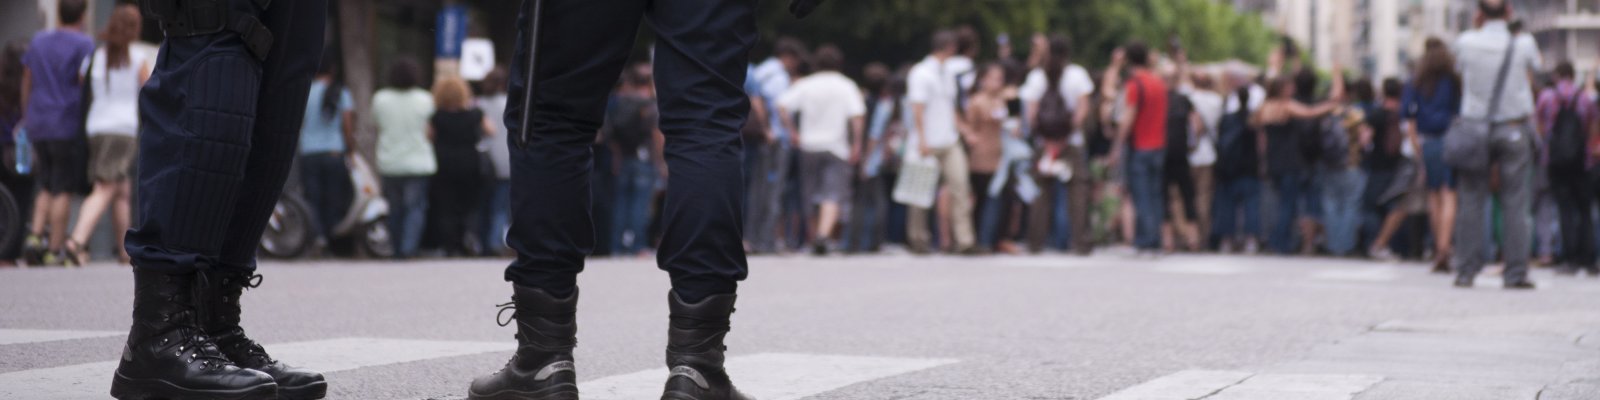 Legs of two police officers standing on the street. Foto via: iStock/Lalocracio